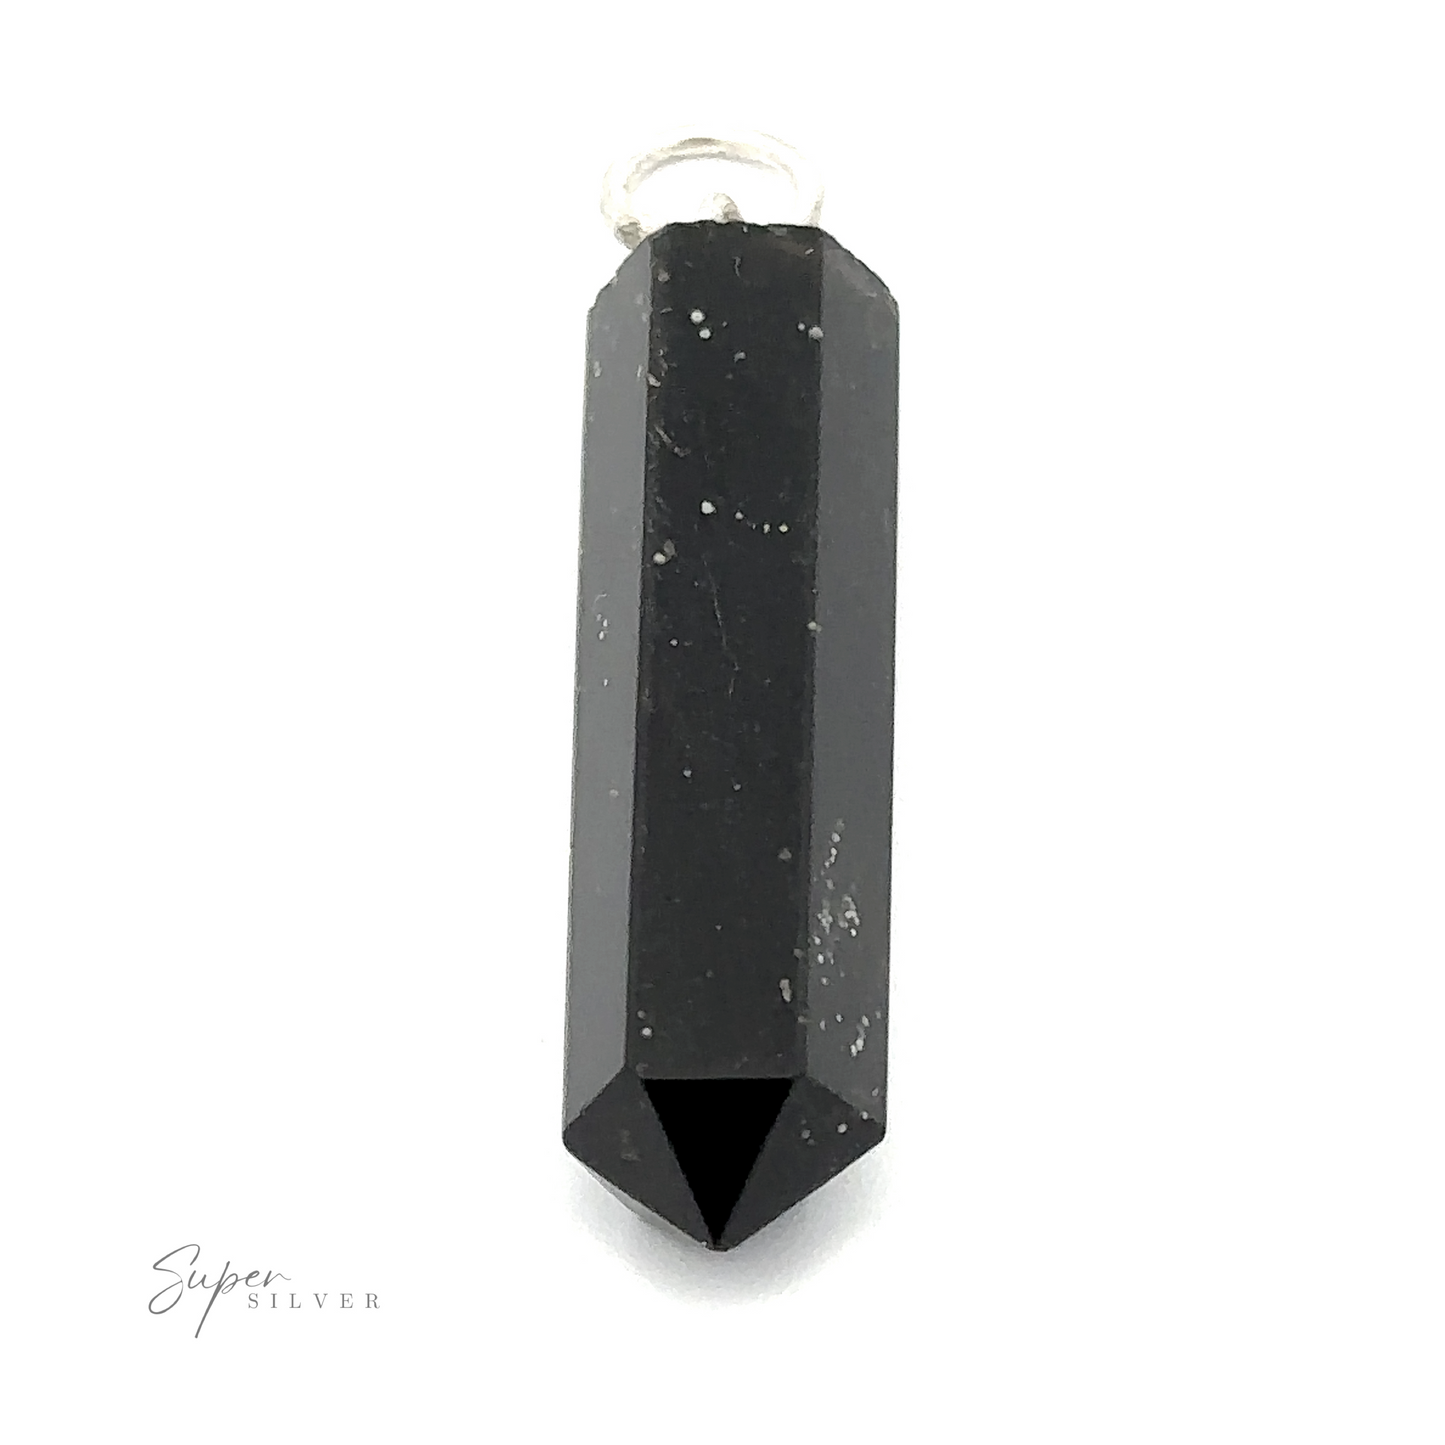 
                  
                    A Raw Stone Obelisk Pendant with a small metal loop at the top for attaching to a chain or cord. Featuring a raw obelisk shape, the pendant is shown against a white background.
                  
                